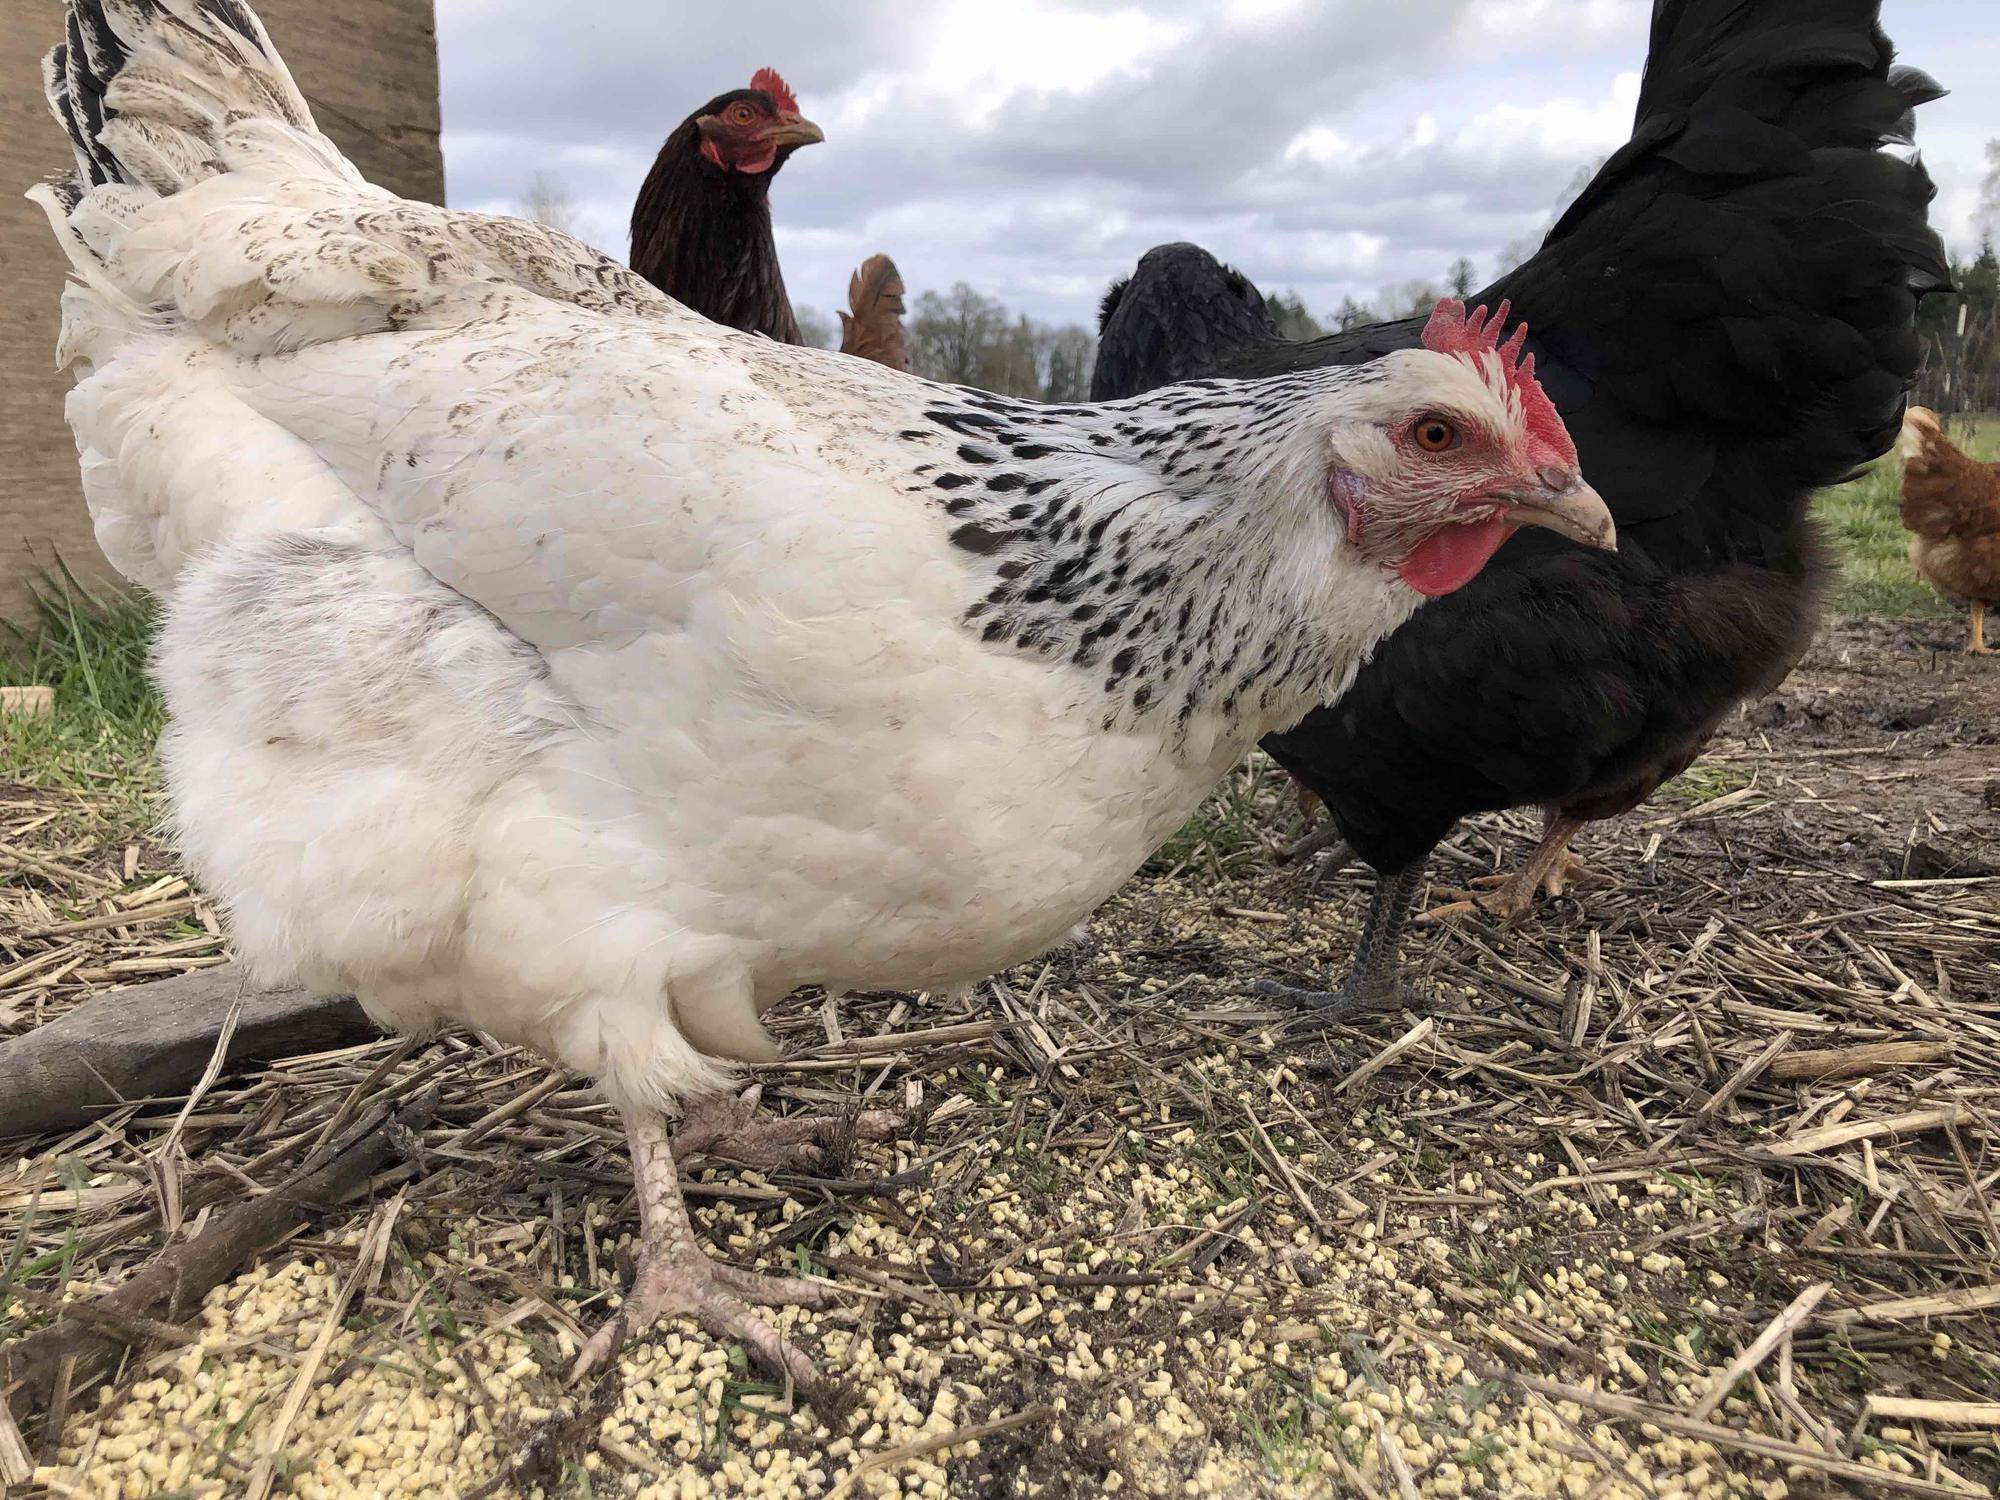 A close-up view of a chicken on a farm with others in the background.